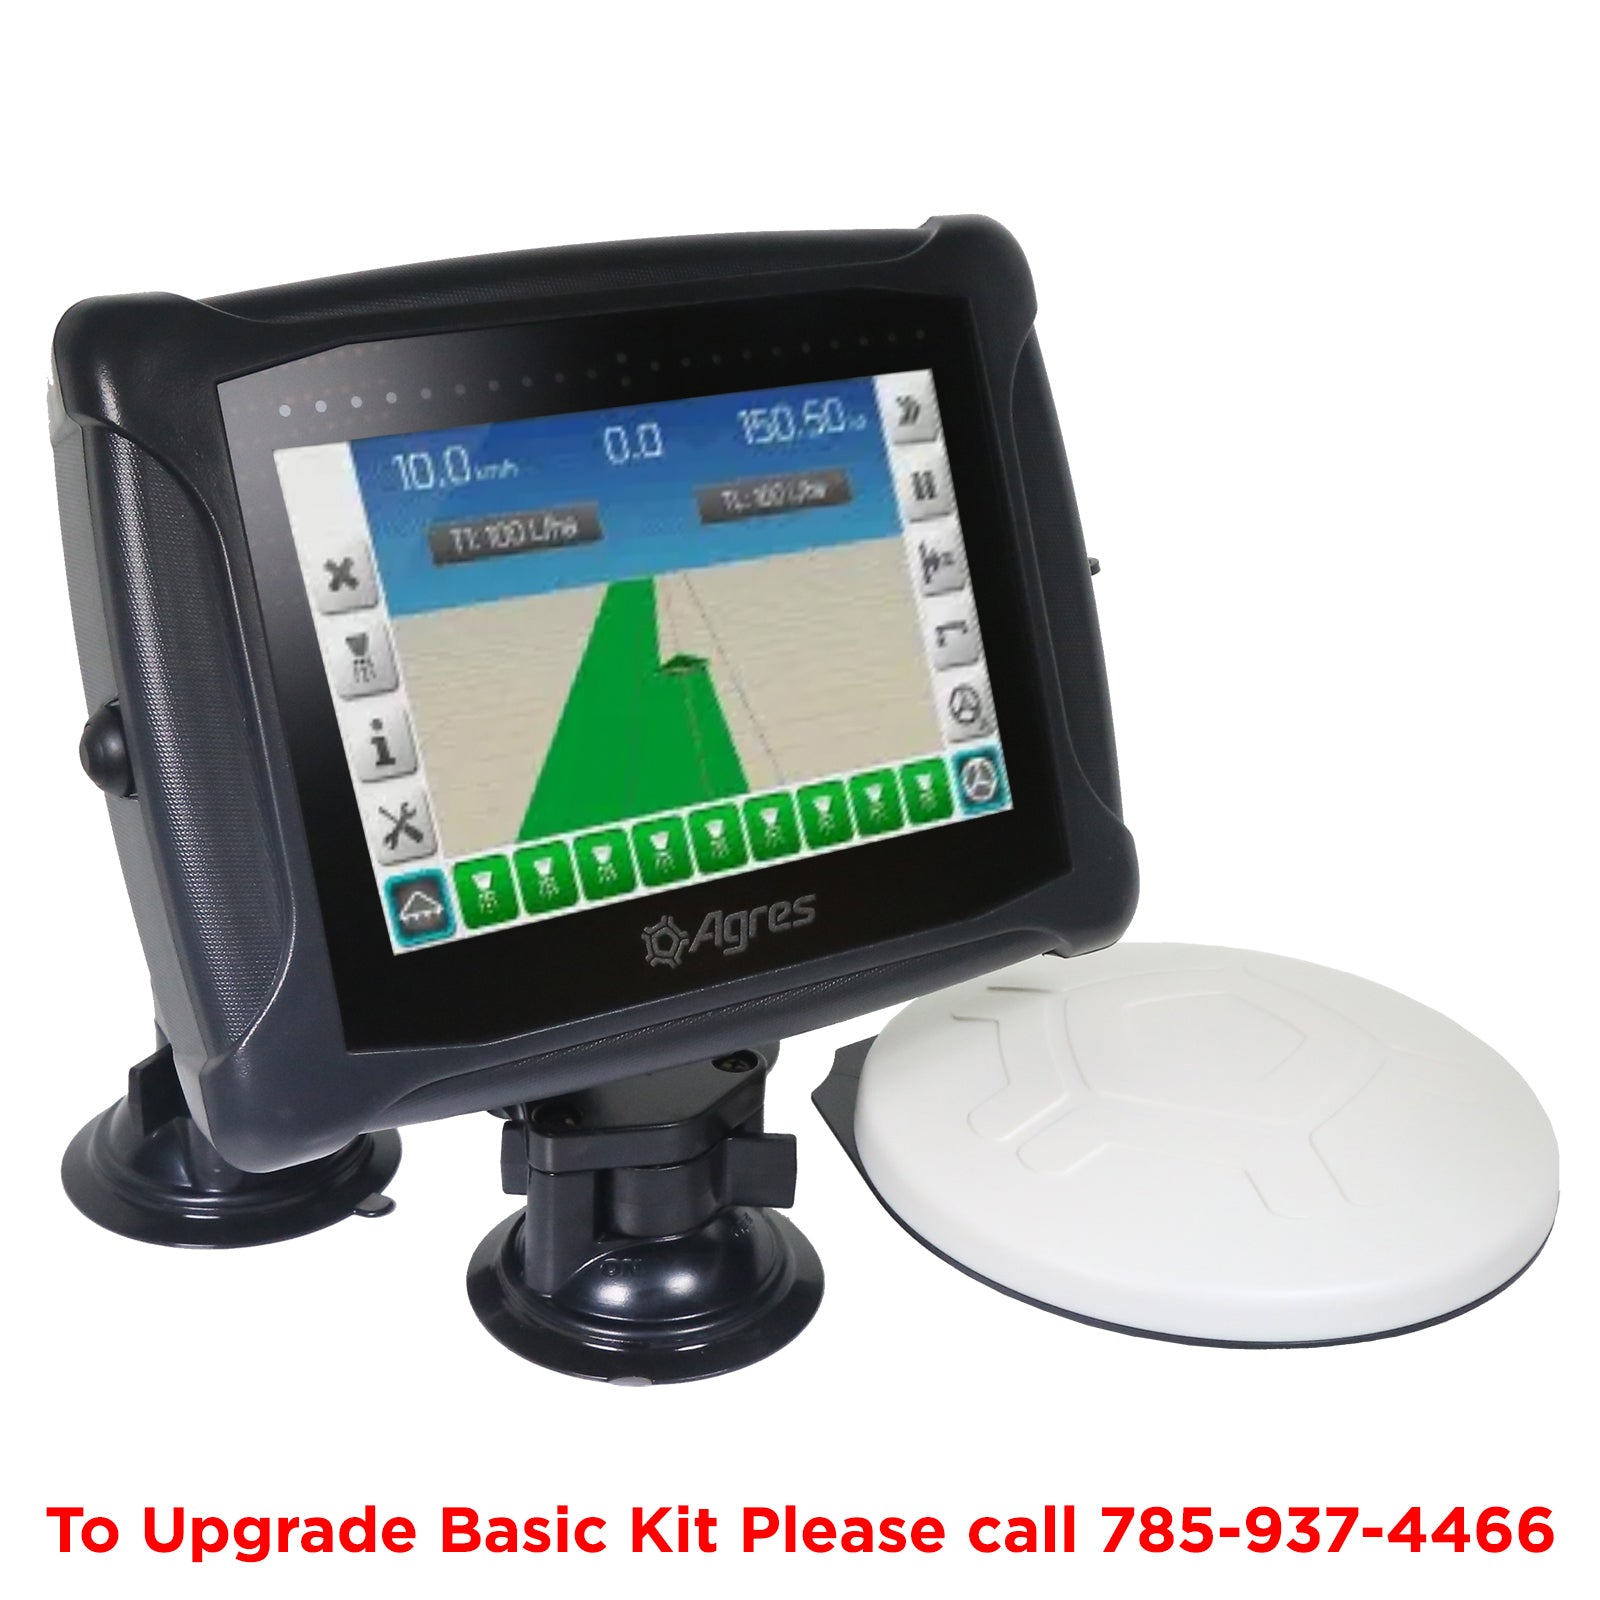 (03) Agres Guidance System | AGRONAVE 30